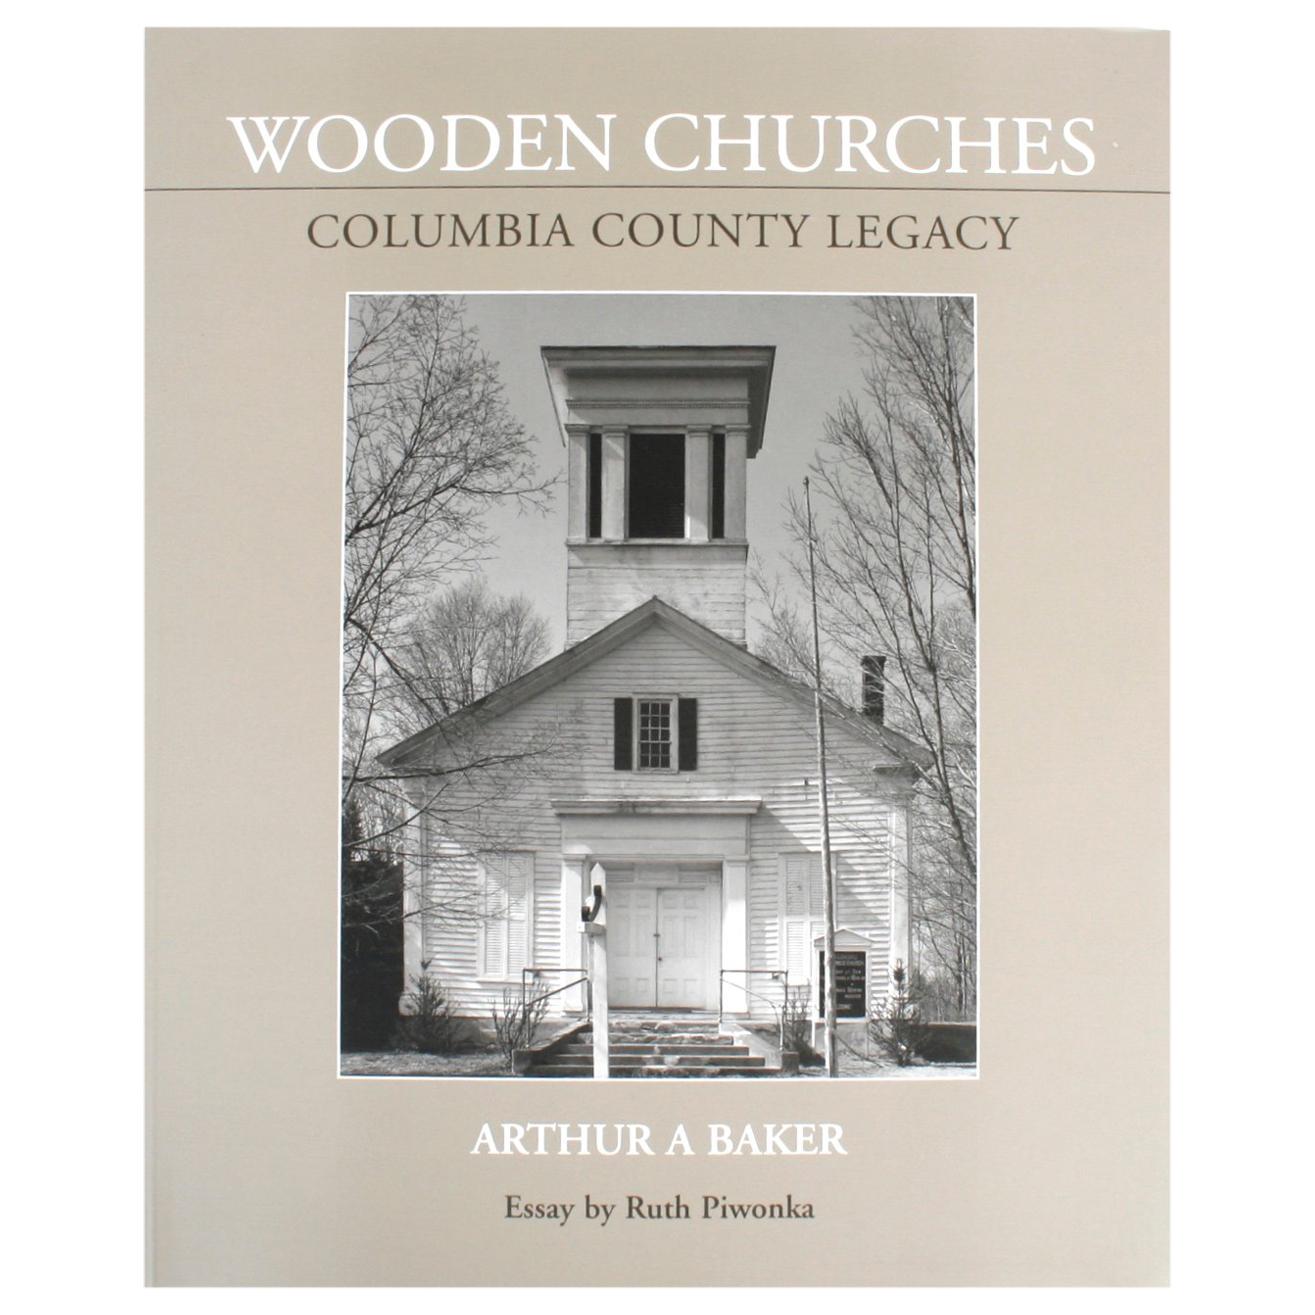 Wooden Churches Columbia County Legacy by Arthur A Baker, 1st Edition